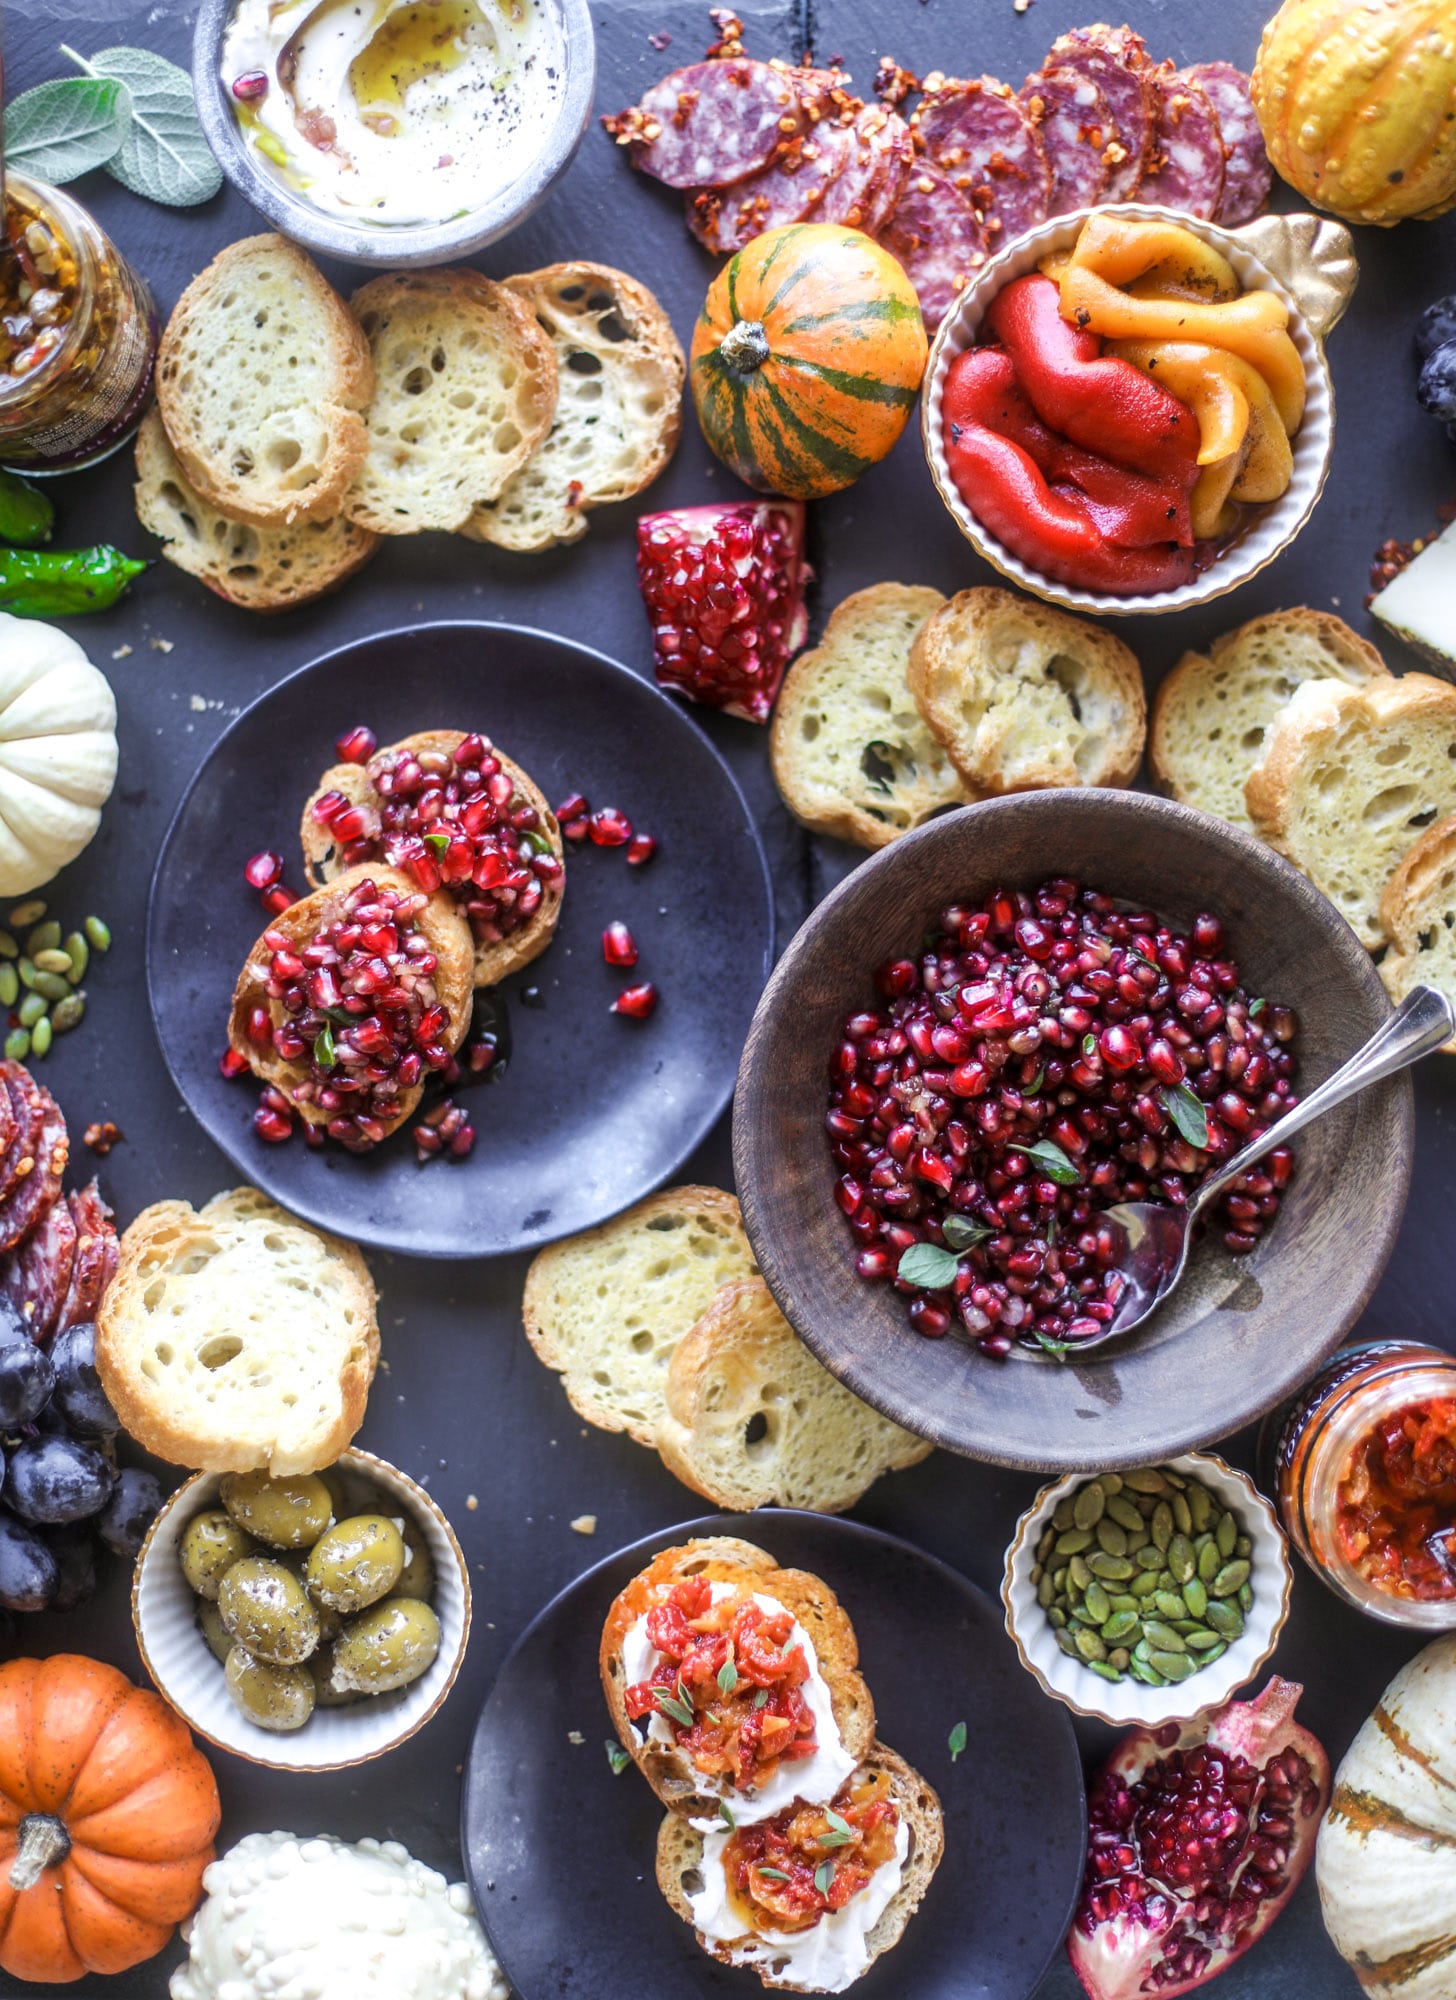 This is the perfect autumn harvest bruschetta board to feed a crowd or serve at a party! The standout is pomegranate relish with a cinnamon shallot vinaigrette, lots of toasty bread, bruschettas, cheese and olives. Everything that's delish! I howsweeteats.com #bruschetta #board